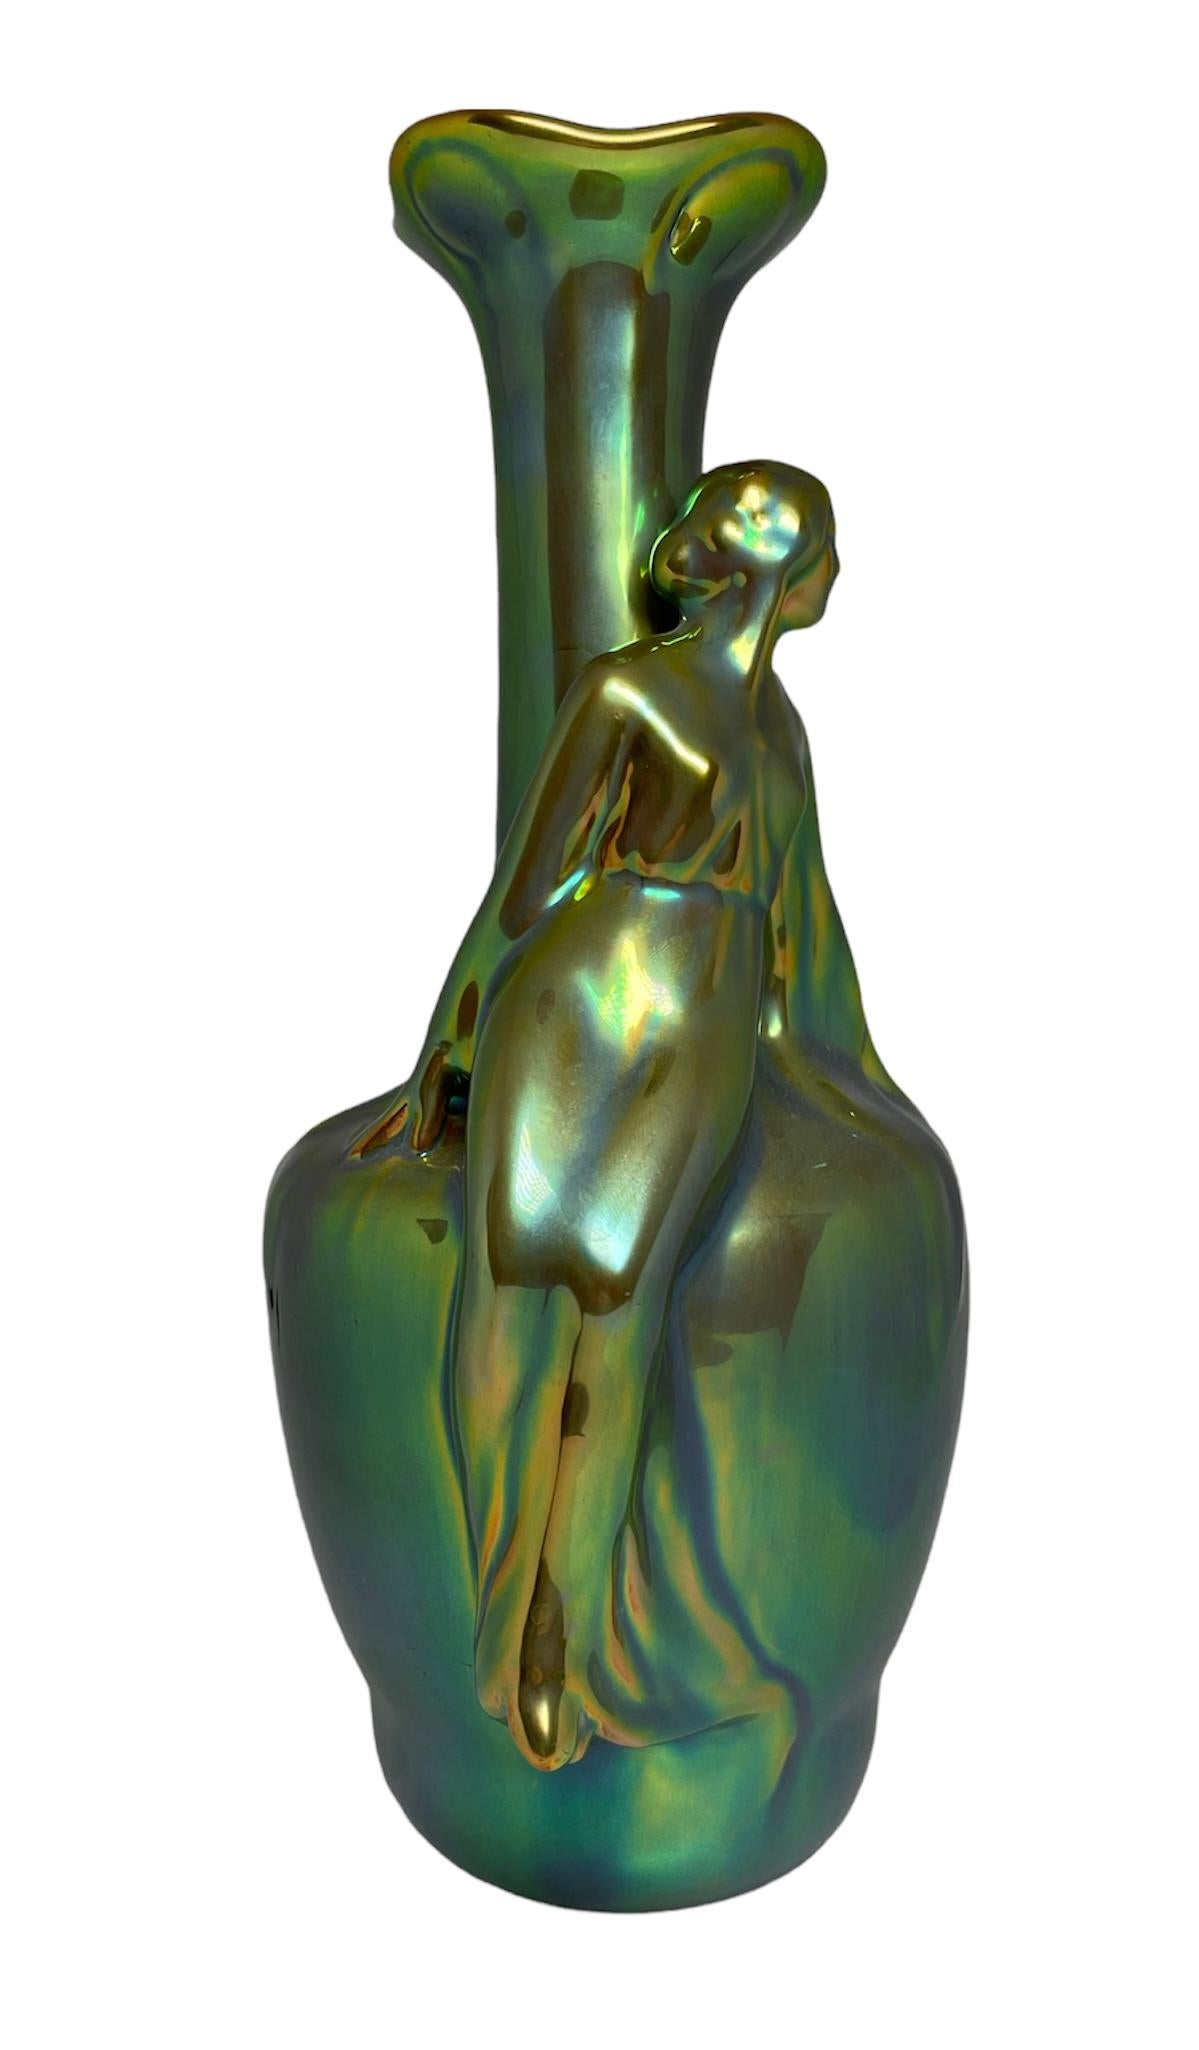 This is an Art Nouveau Zsolnay eosin green glazed ceramic vase. It depicts an urn shaped vase with long neck and a maid with a long dress looking to the side sat in the body of the urn with her back in from of its neck. The vase shows different